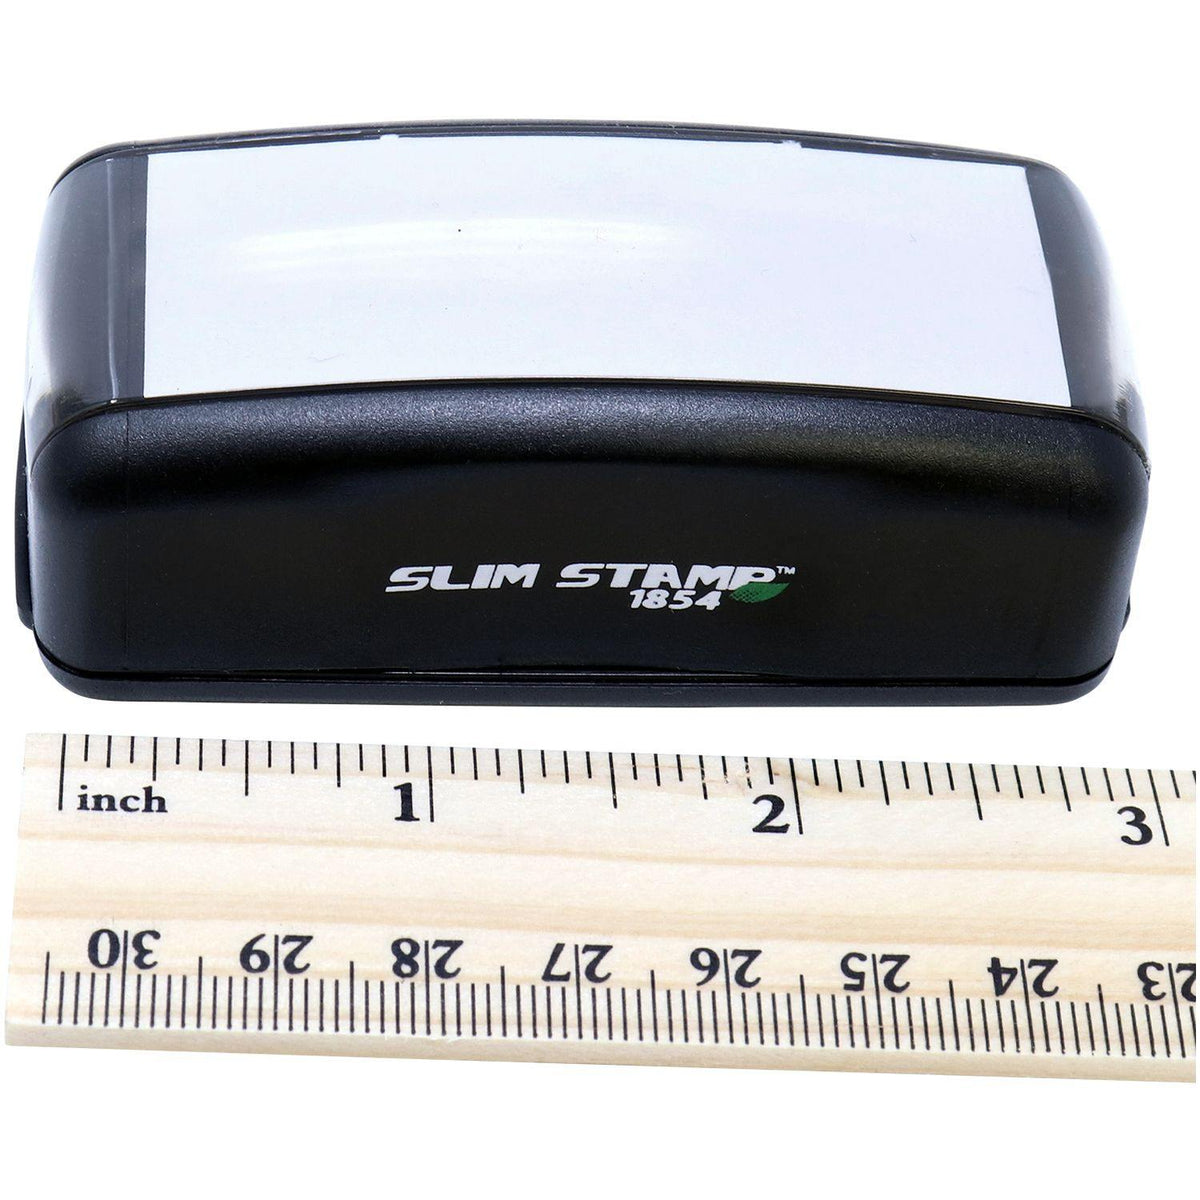 Measurement Large Pre-Inked Times First Class Mail Stamp with Ruler